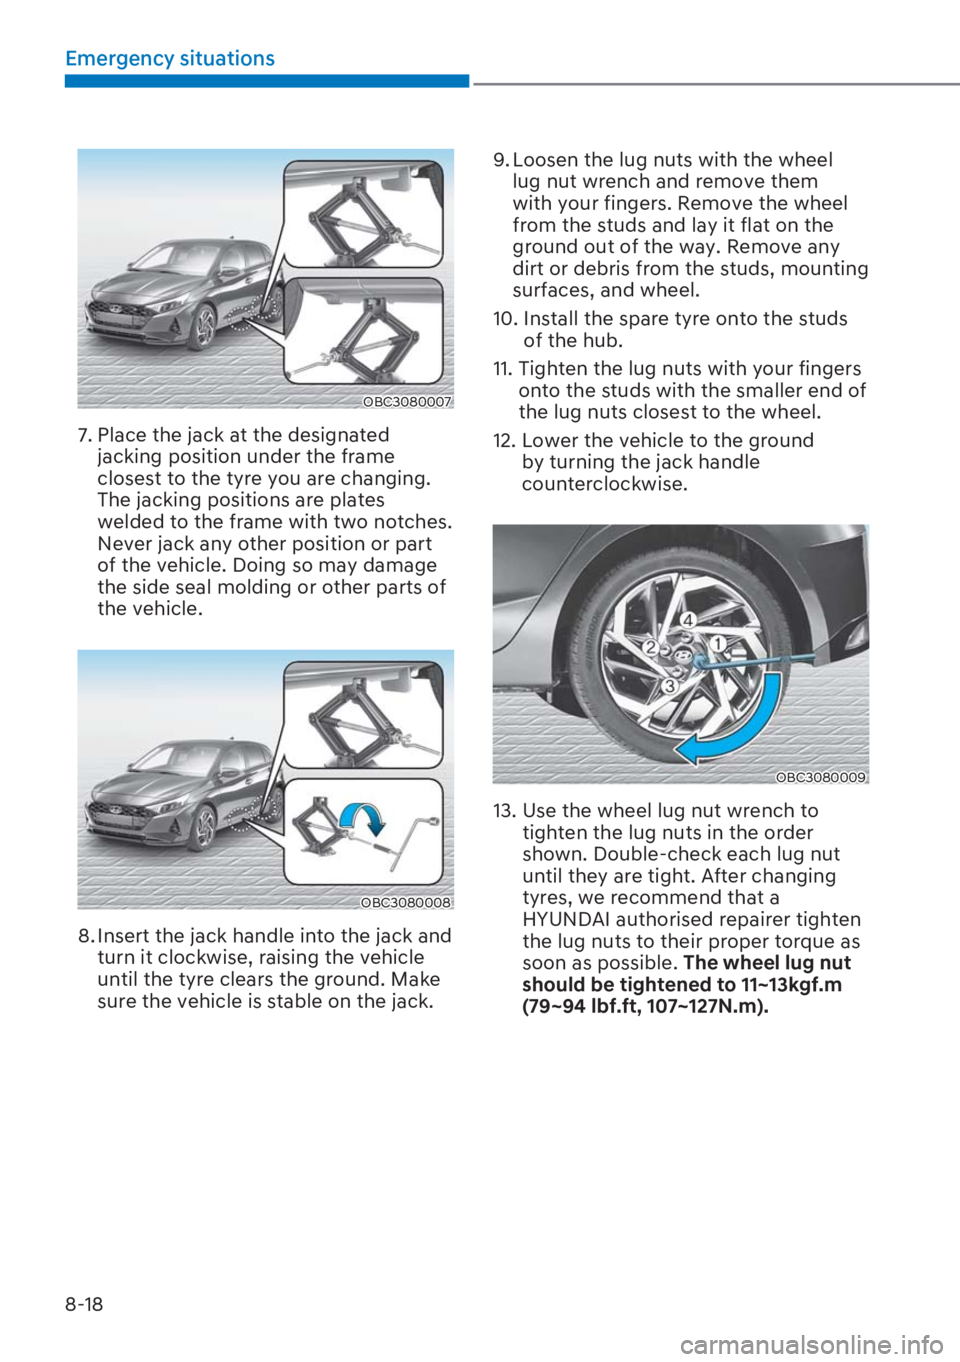 HYUNDAI I20 2023  Owners Manual 8-18
Emergency situations
OBC3080007
7. Place the jack at the designated 
jacking position under the frame 
closest to the tyre you are changing. 
The jacking positions are plates 
welded to the frame